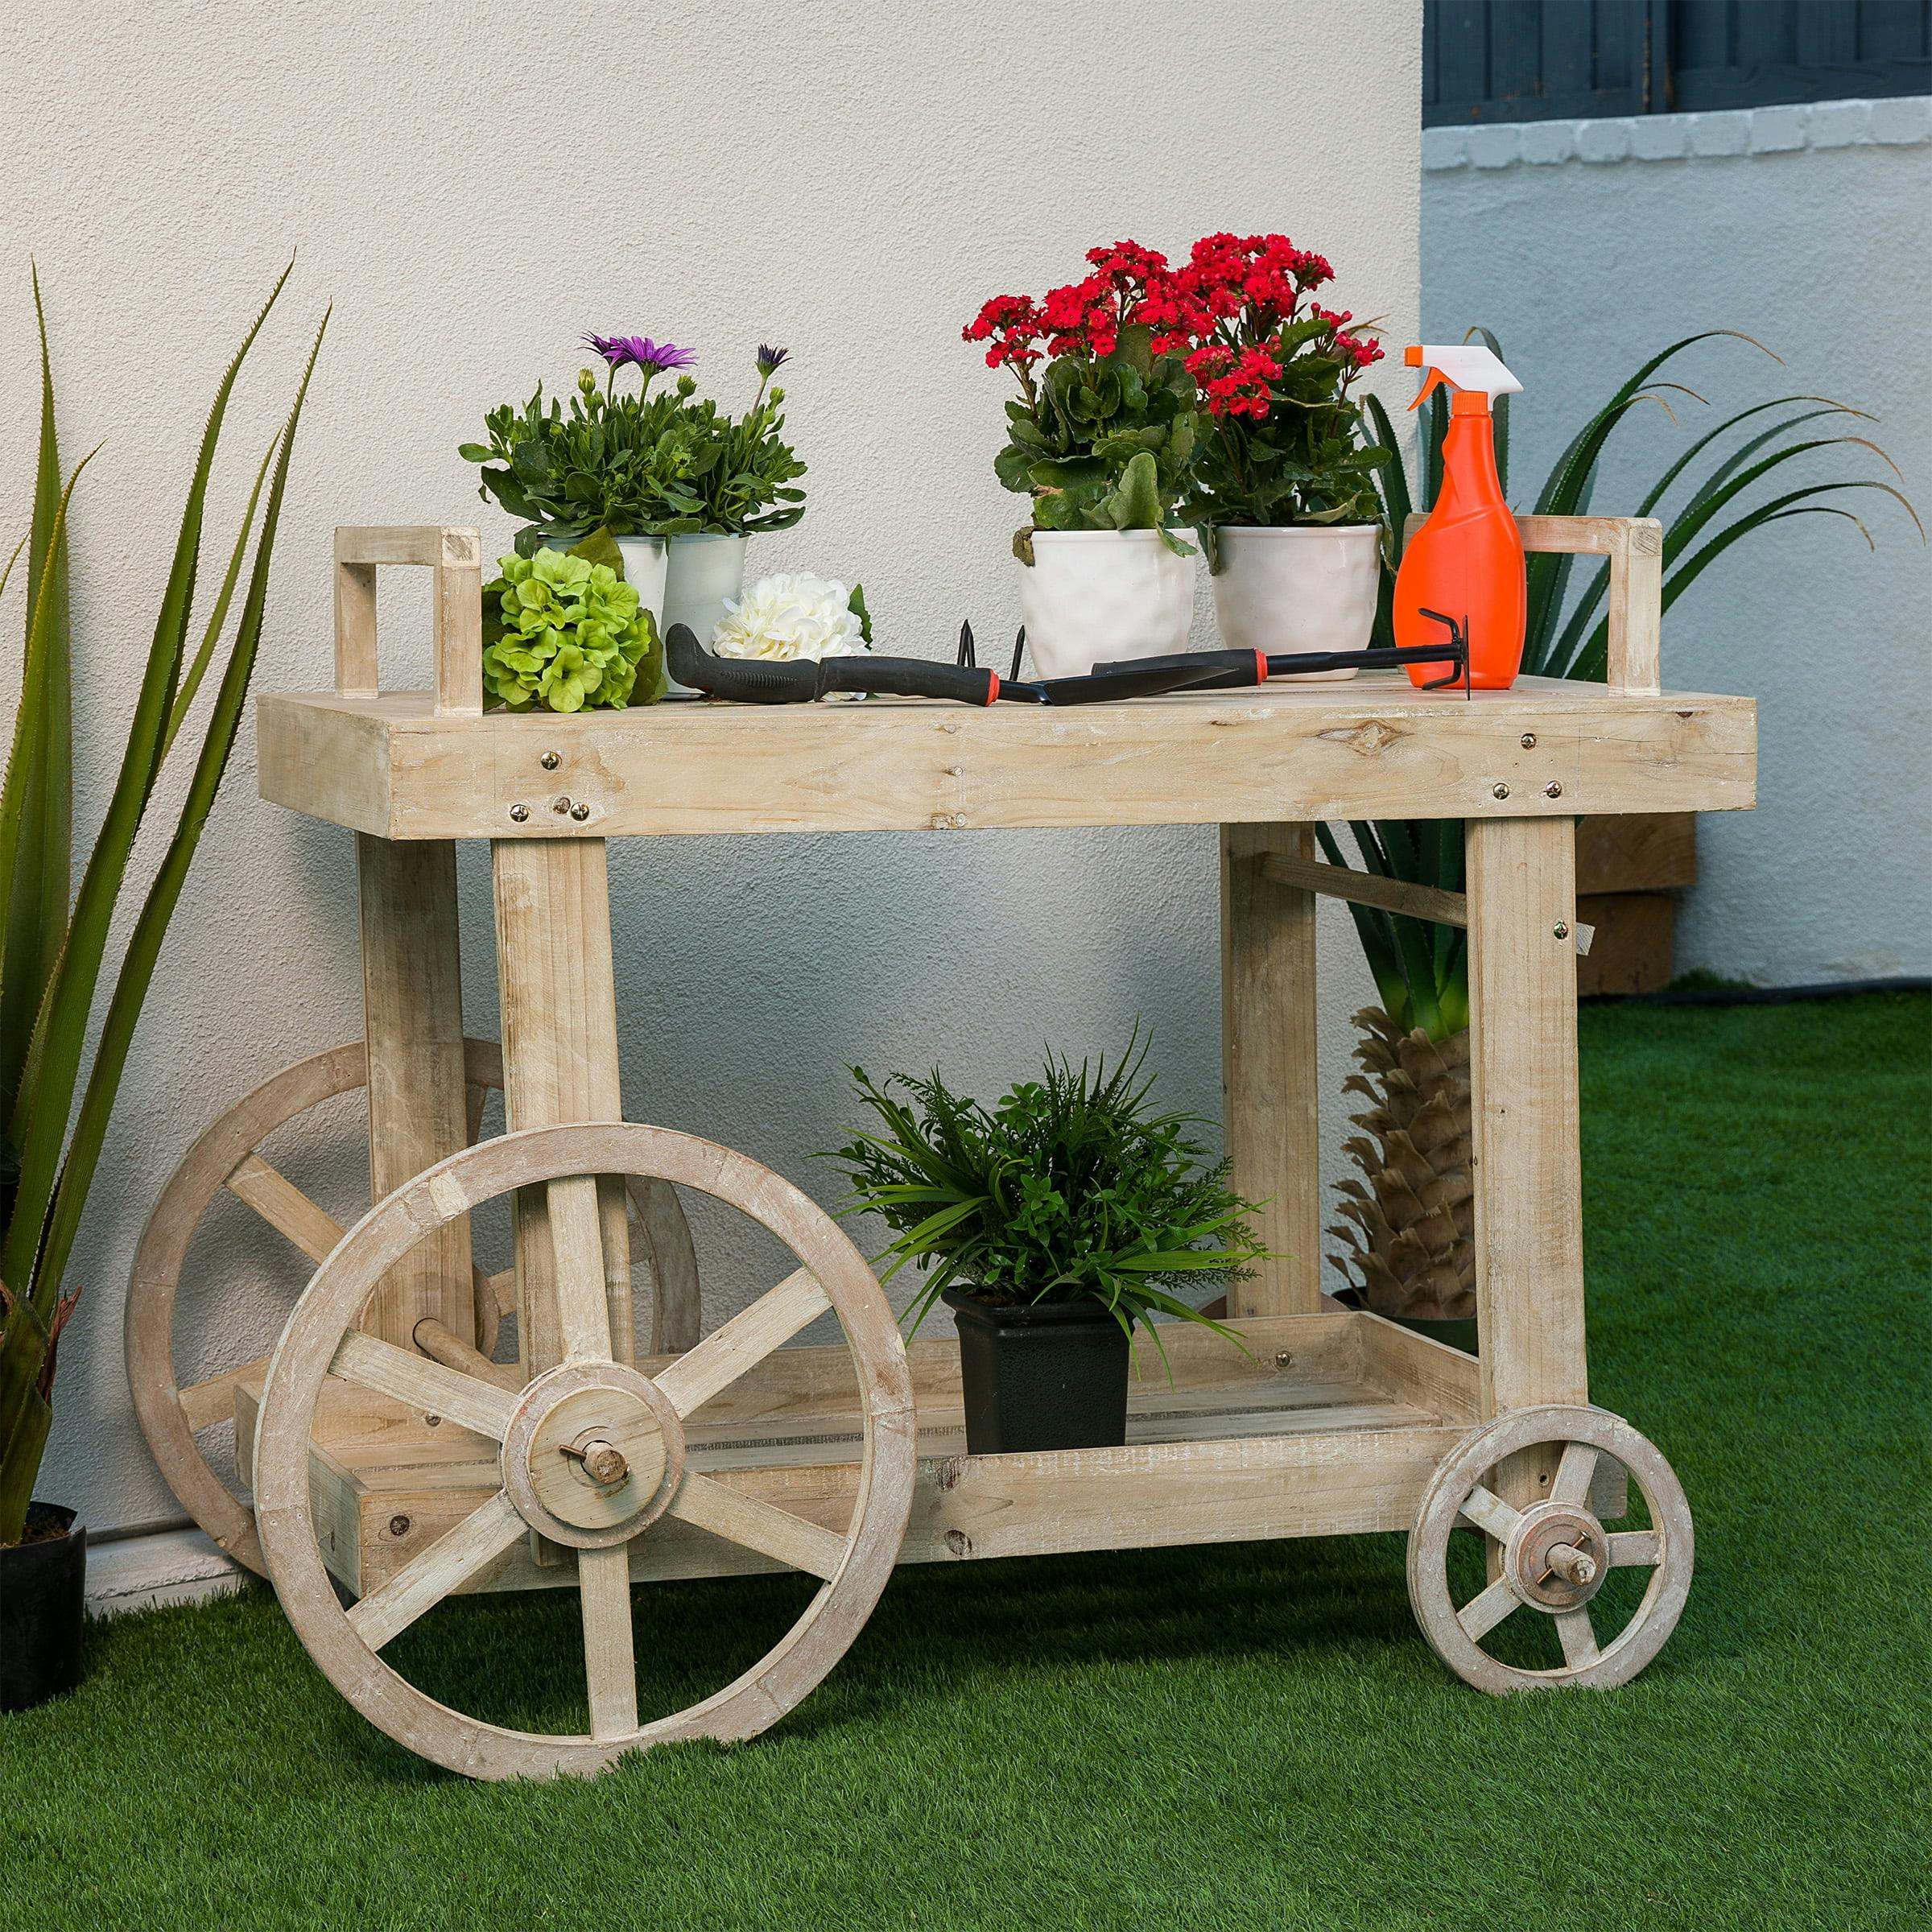 Rustic Multi-Color Wooden Garden Cart Display with Wheels